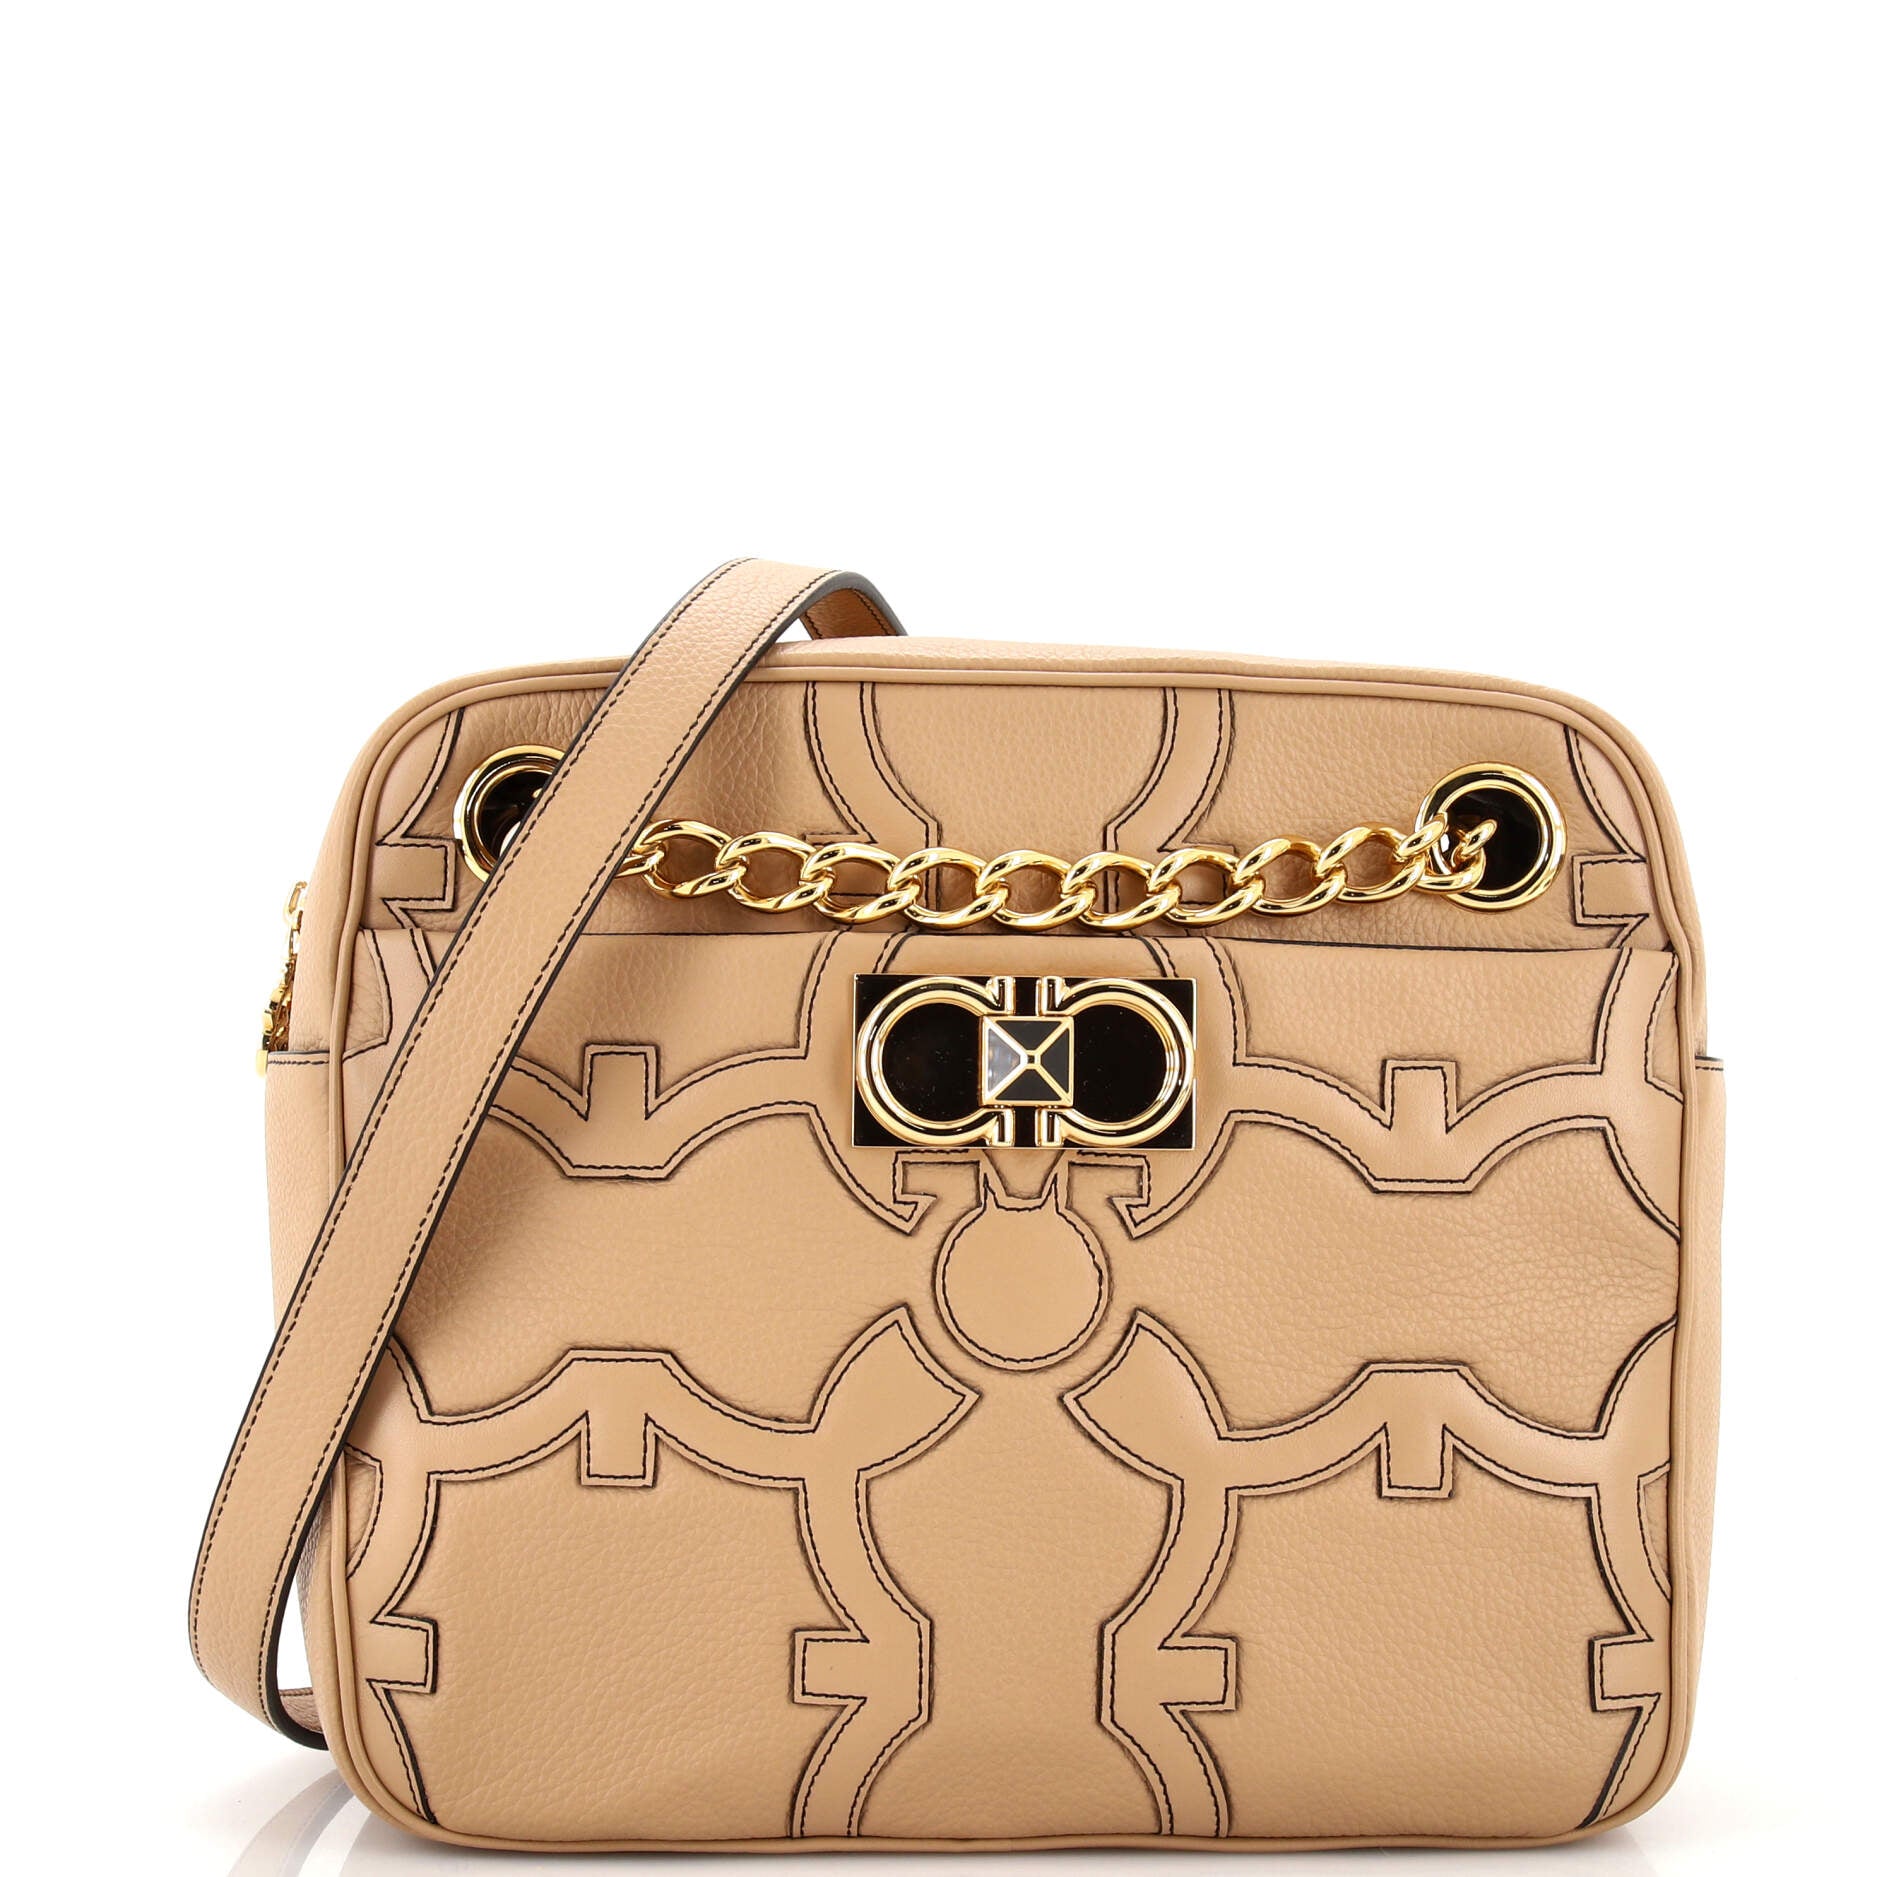 Iconic Camera Shoulder Bag Leather with Applique